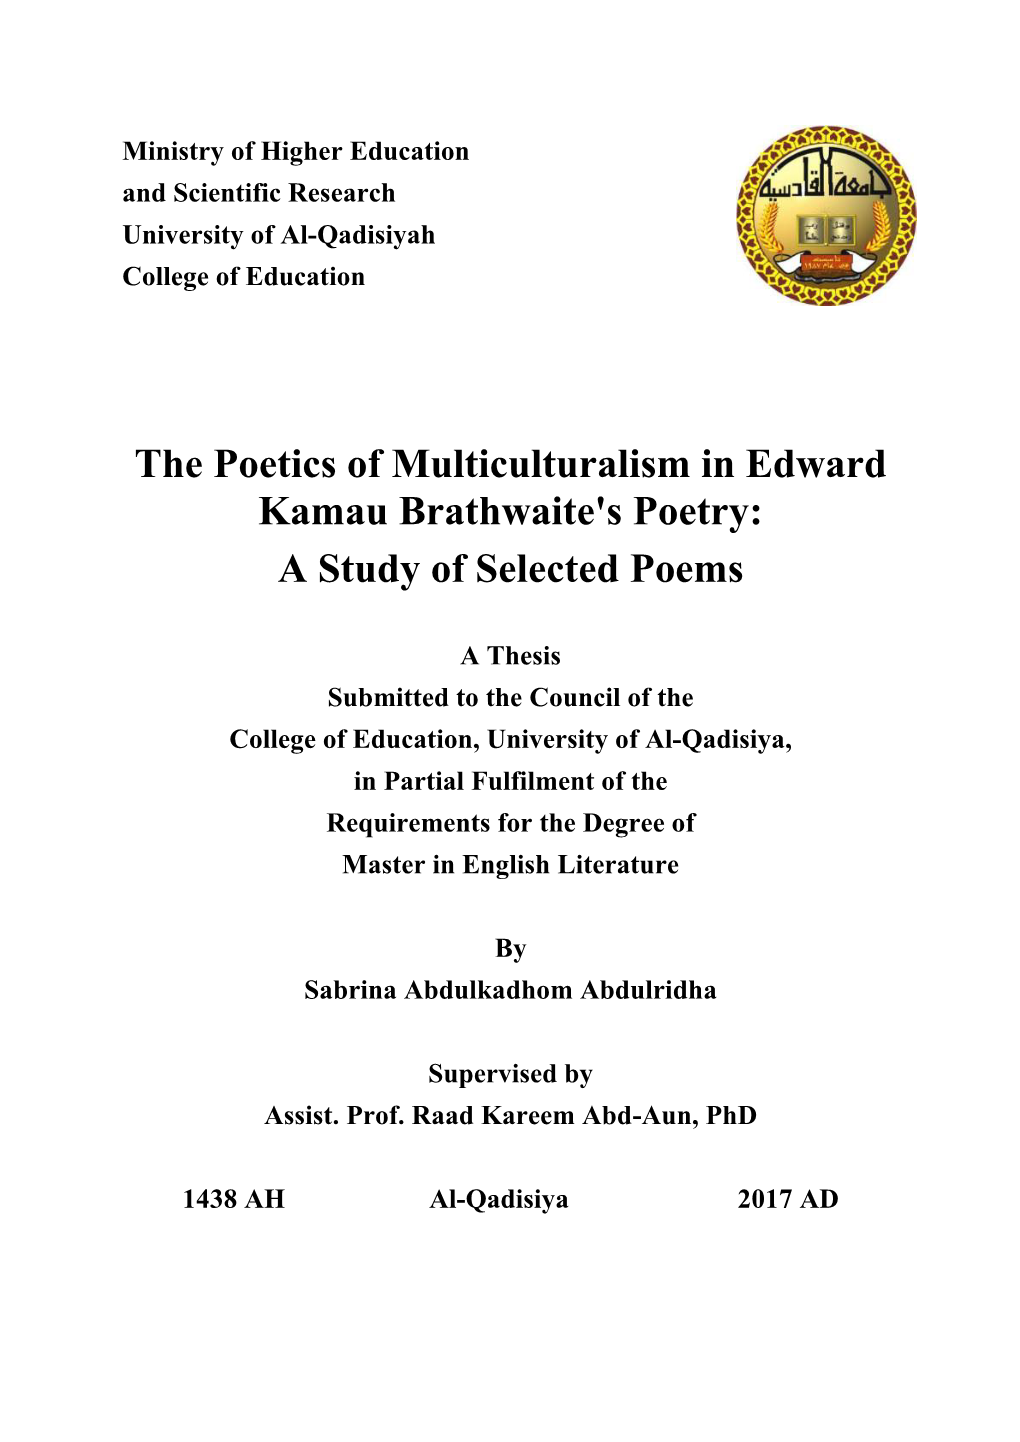 The Poetics of Multiculturalism in Edward Kamau Brathwaite's Poetry: a Study of Selected Poems